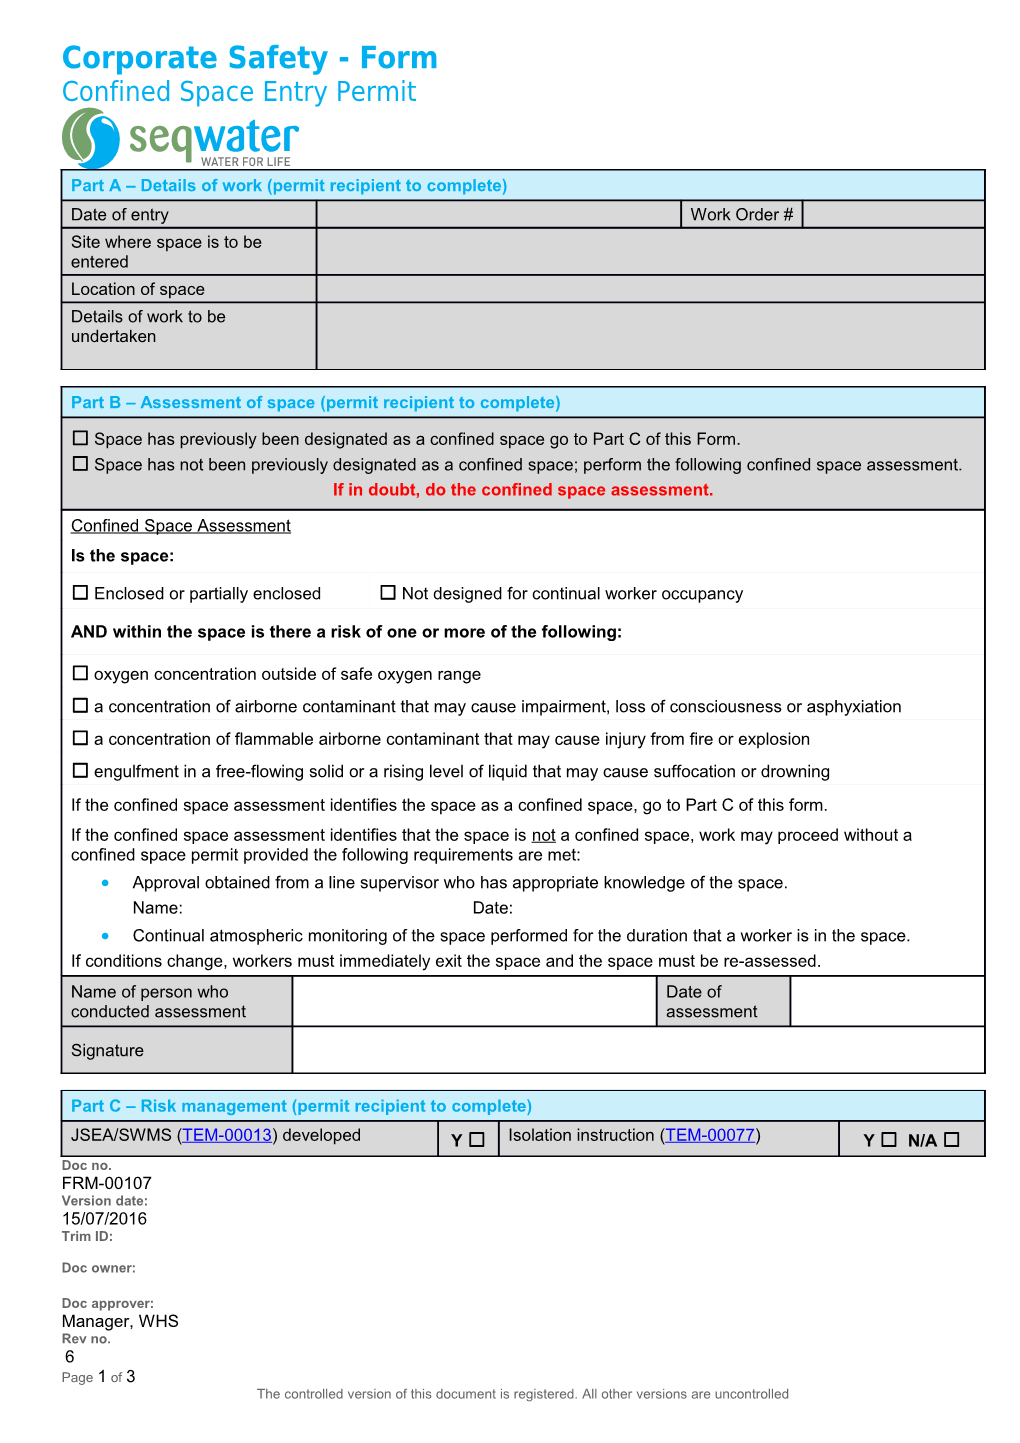 Corporate Safety - Confined Space Entry Permit Form